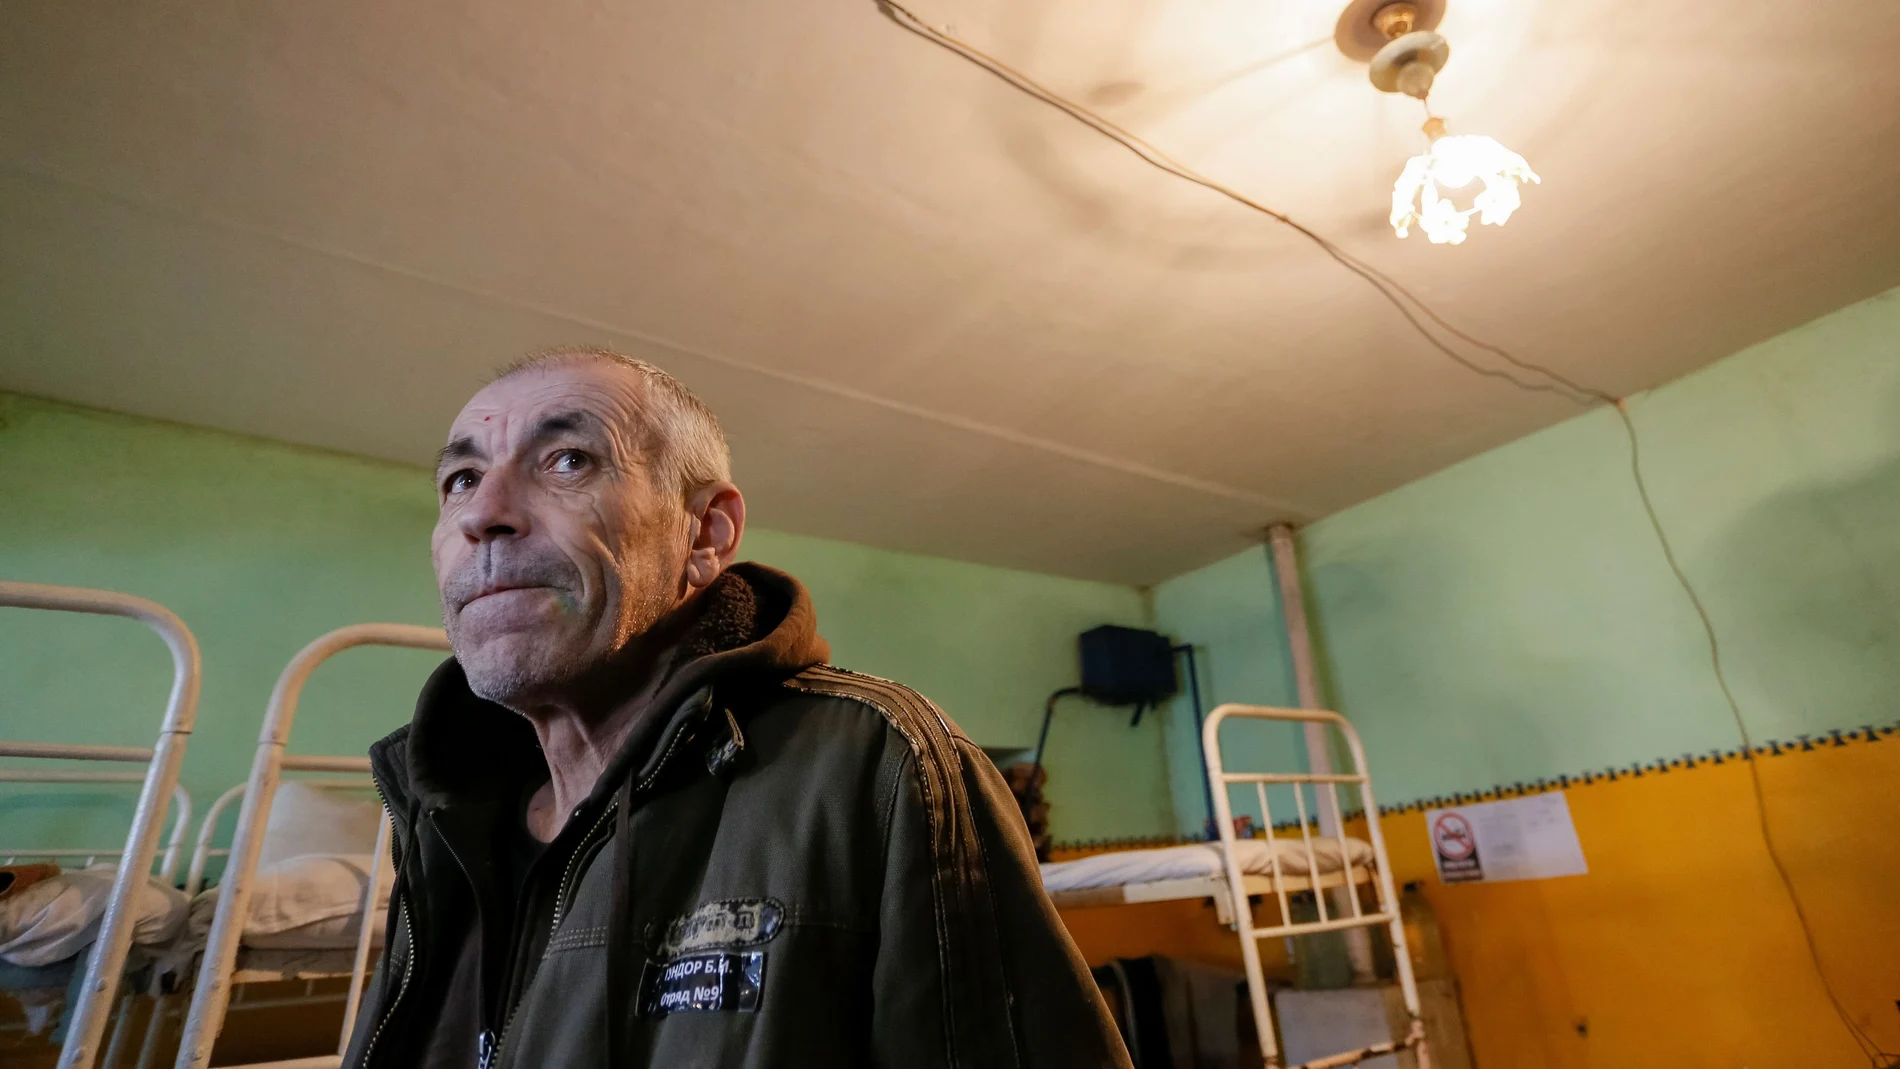 Boris Pundor, a prisoner of war from the Ukrainian armed forces, is seen inside a cell at a penitentiary colony in the rebel-controlled settlement of Makiivka outside Donetsk